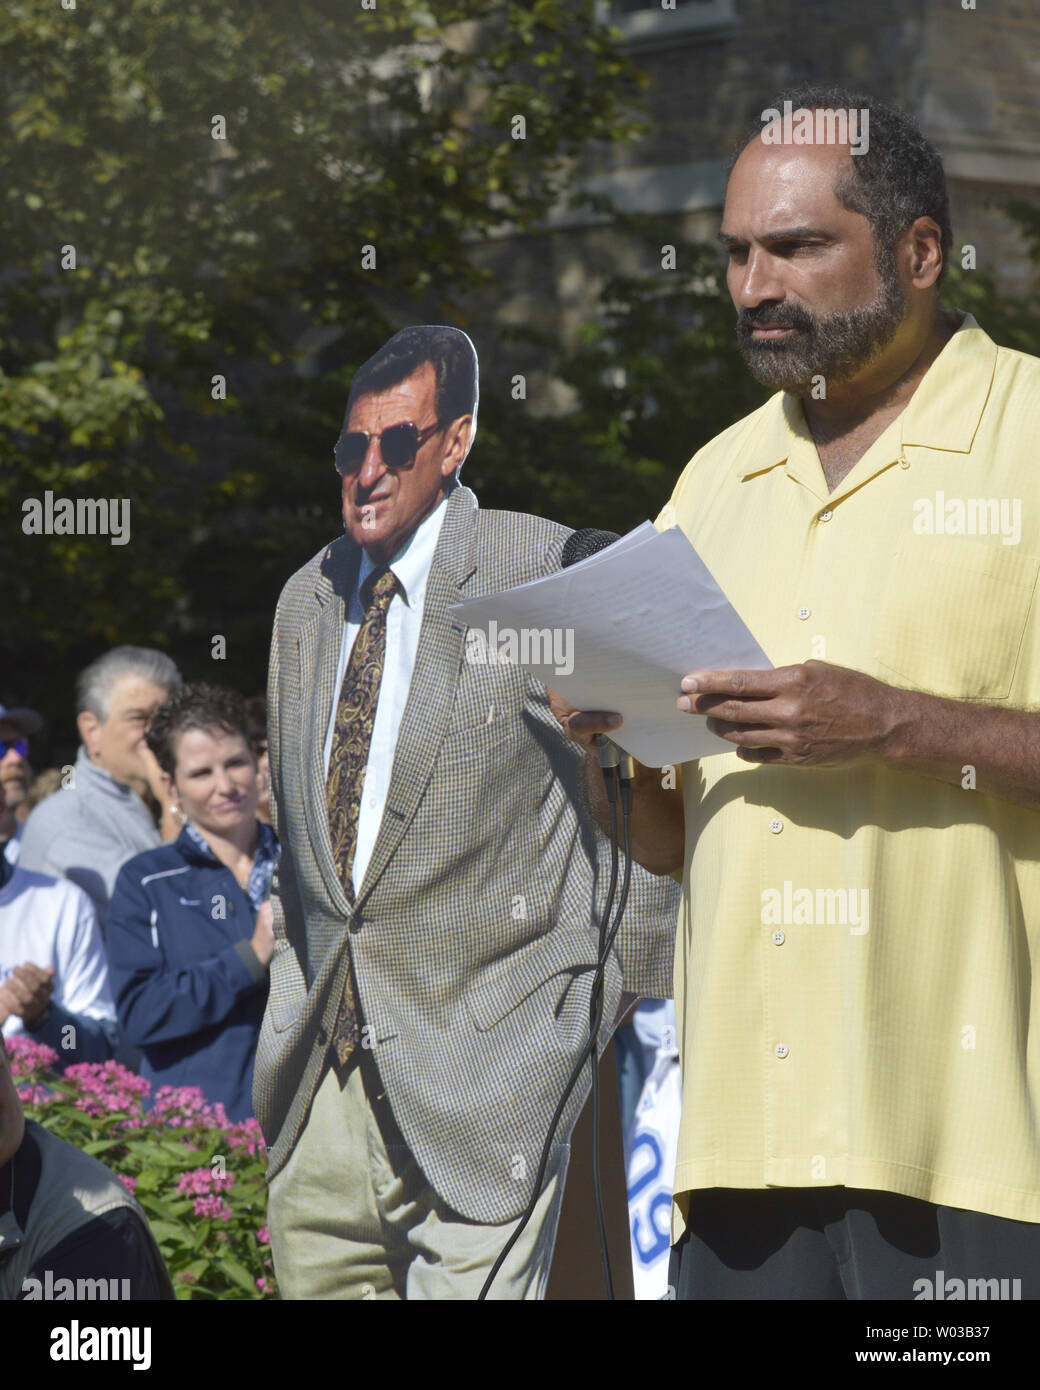 former-pittsburgh-steelers-and-penn-state-alumni-franco-harris-stands-by-a-cardboard-cut-out-of-joe-paterno-as-he-speaks-at-a-rally-calling-for-the-resignation-of-the-universitys-board-of-trustees-in-front-of-old-main-on-the-campus-of-penn-state-in-state-college-pennsylvania-on-september-15-2012-upiarchie-carpenter-W03B37.jpg